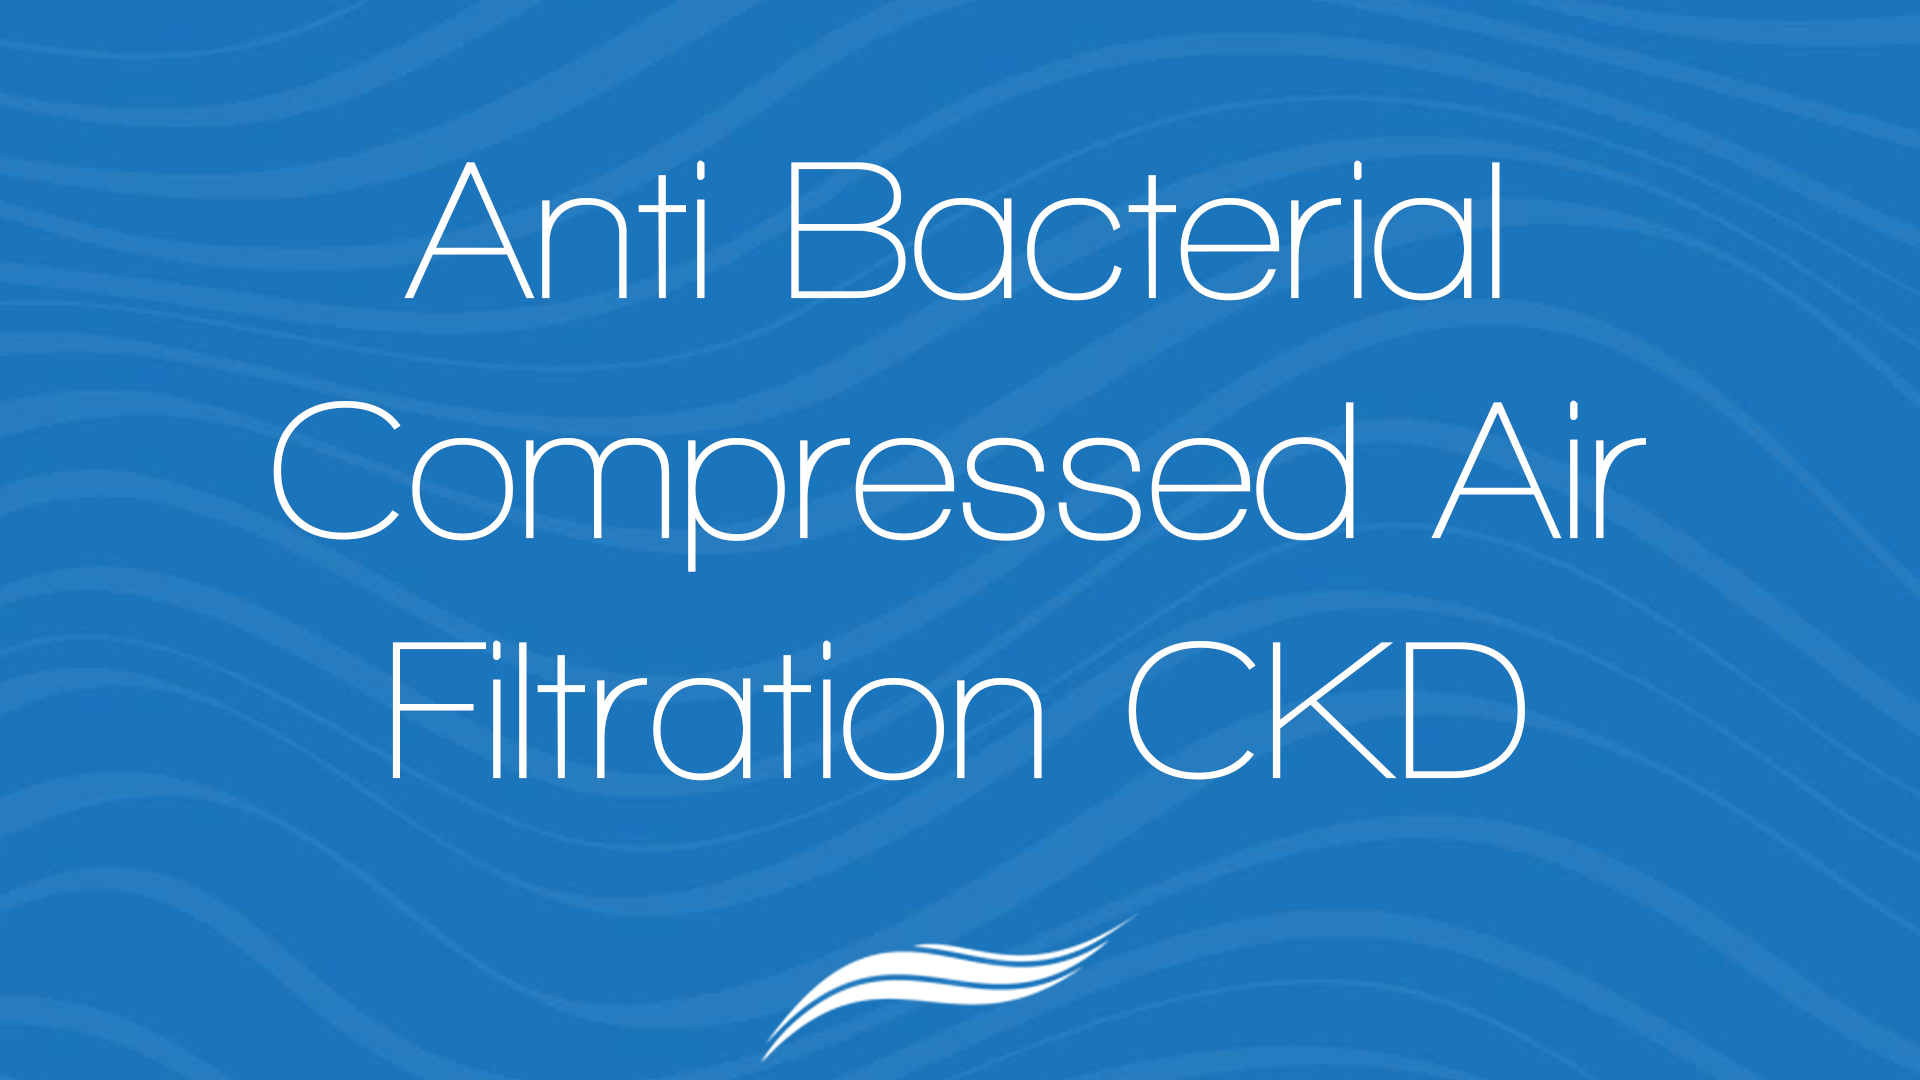 Anti Bacterial Compressed Air | CKD | Pneumatic Products